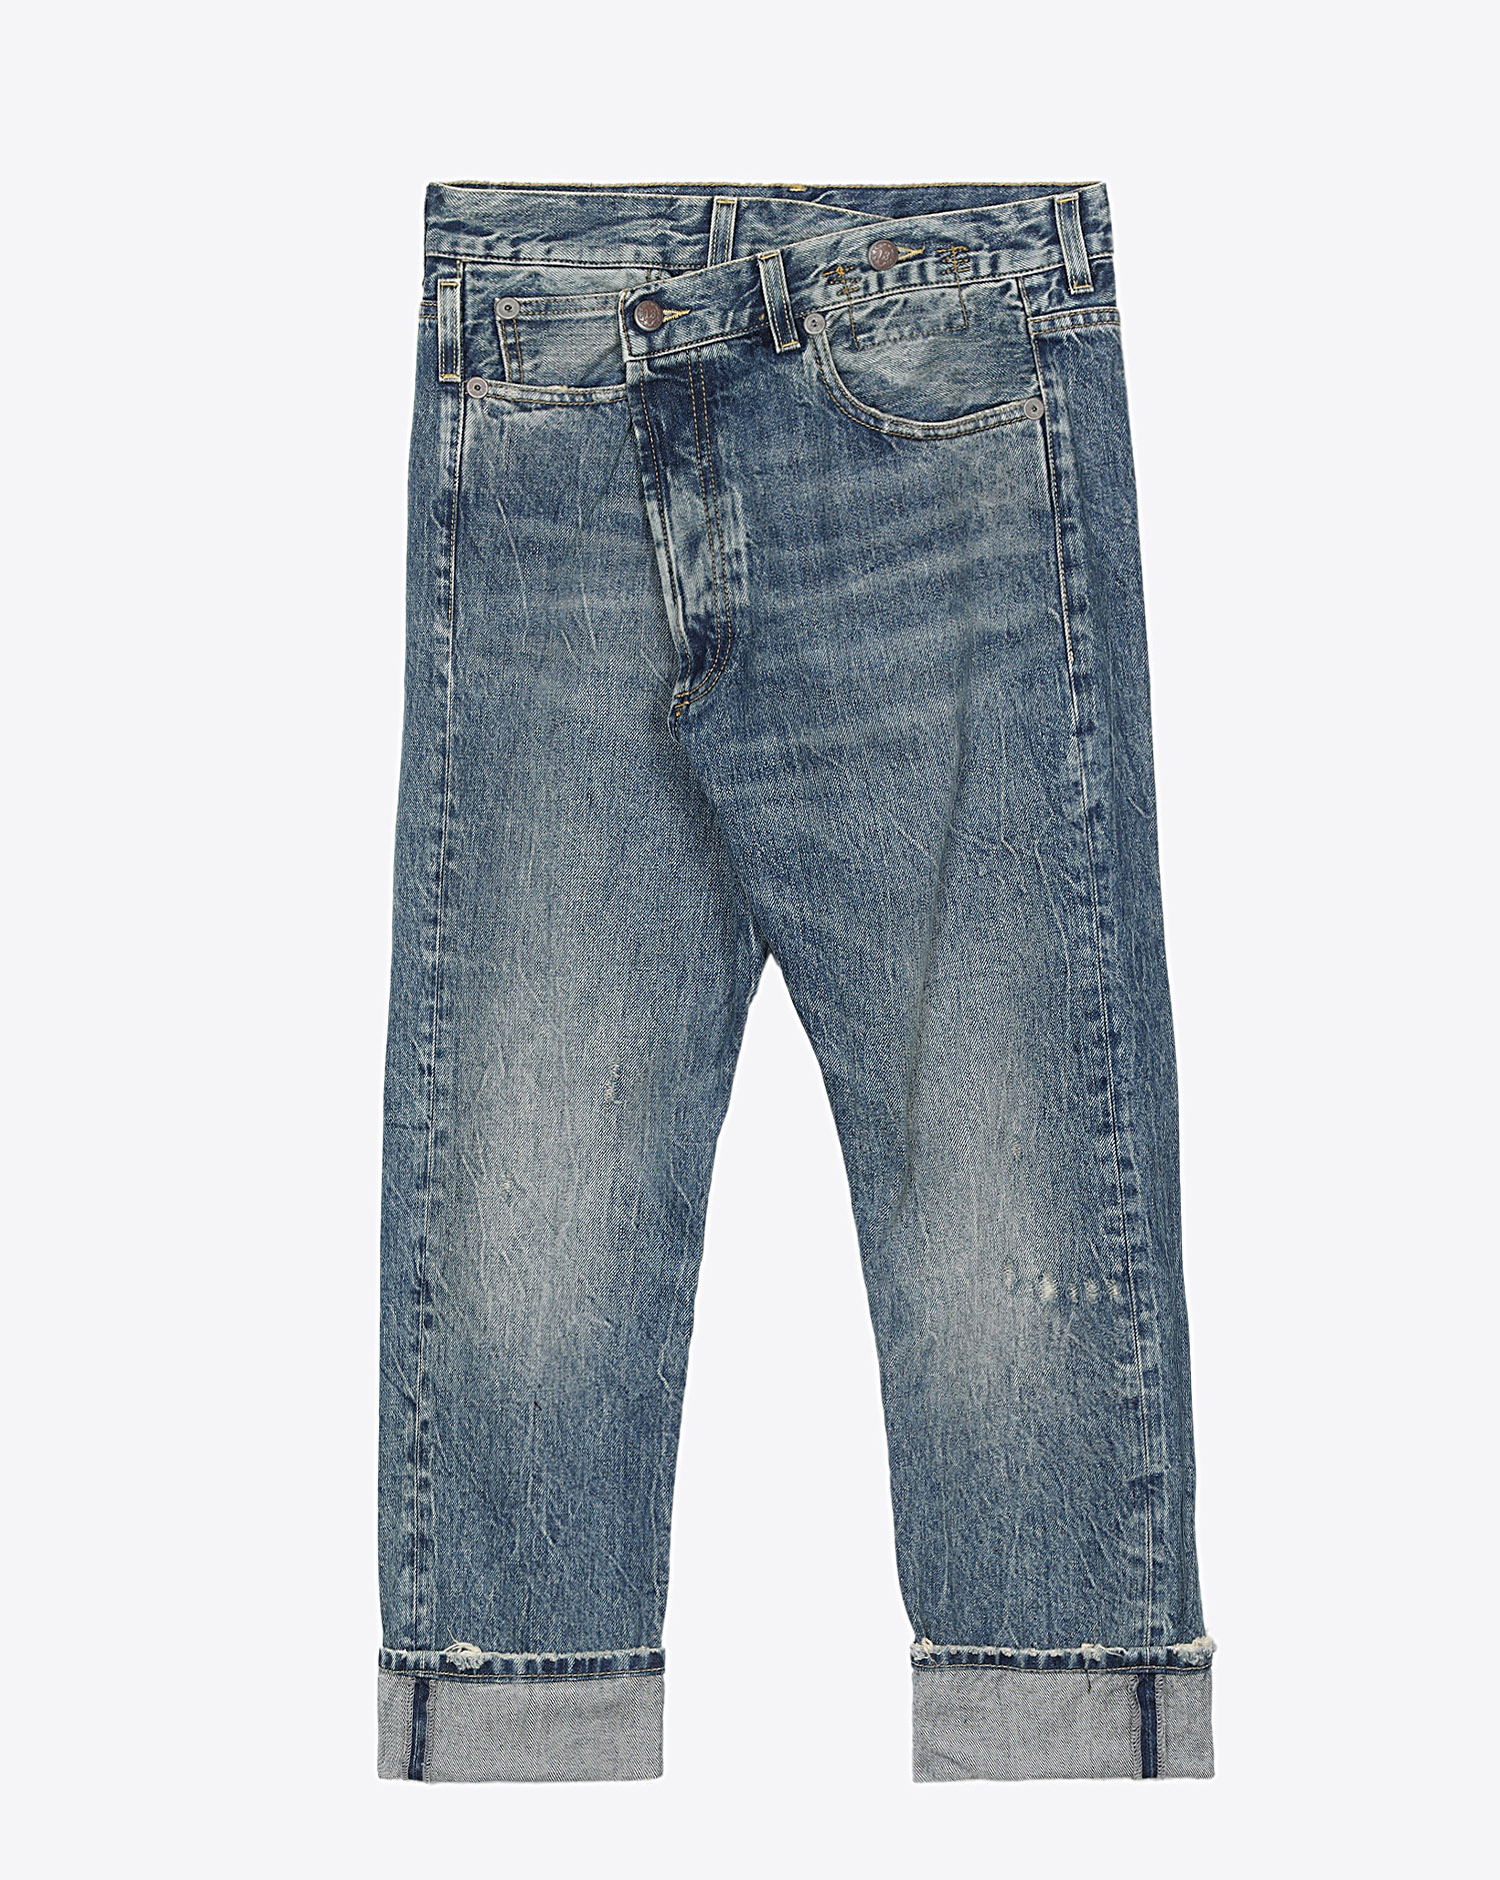 Fed up Fictitious emotional Jeans R13 Denim Permanent Crossover Jean - Kelly